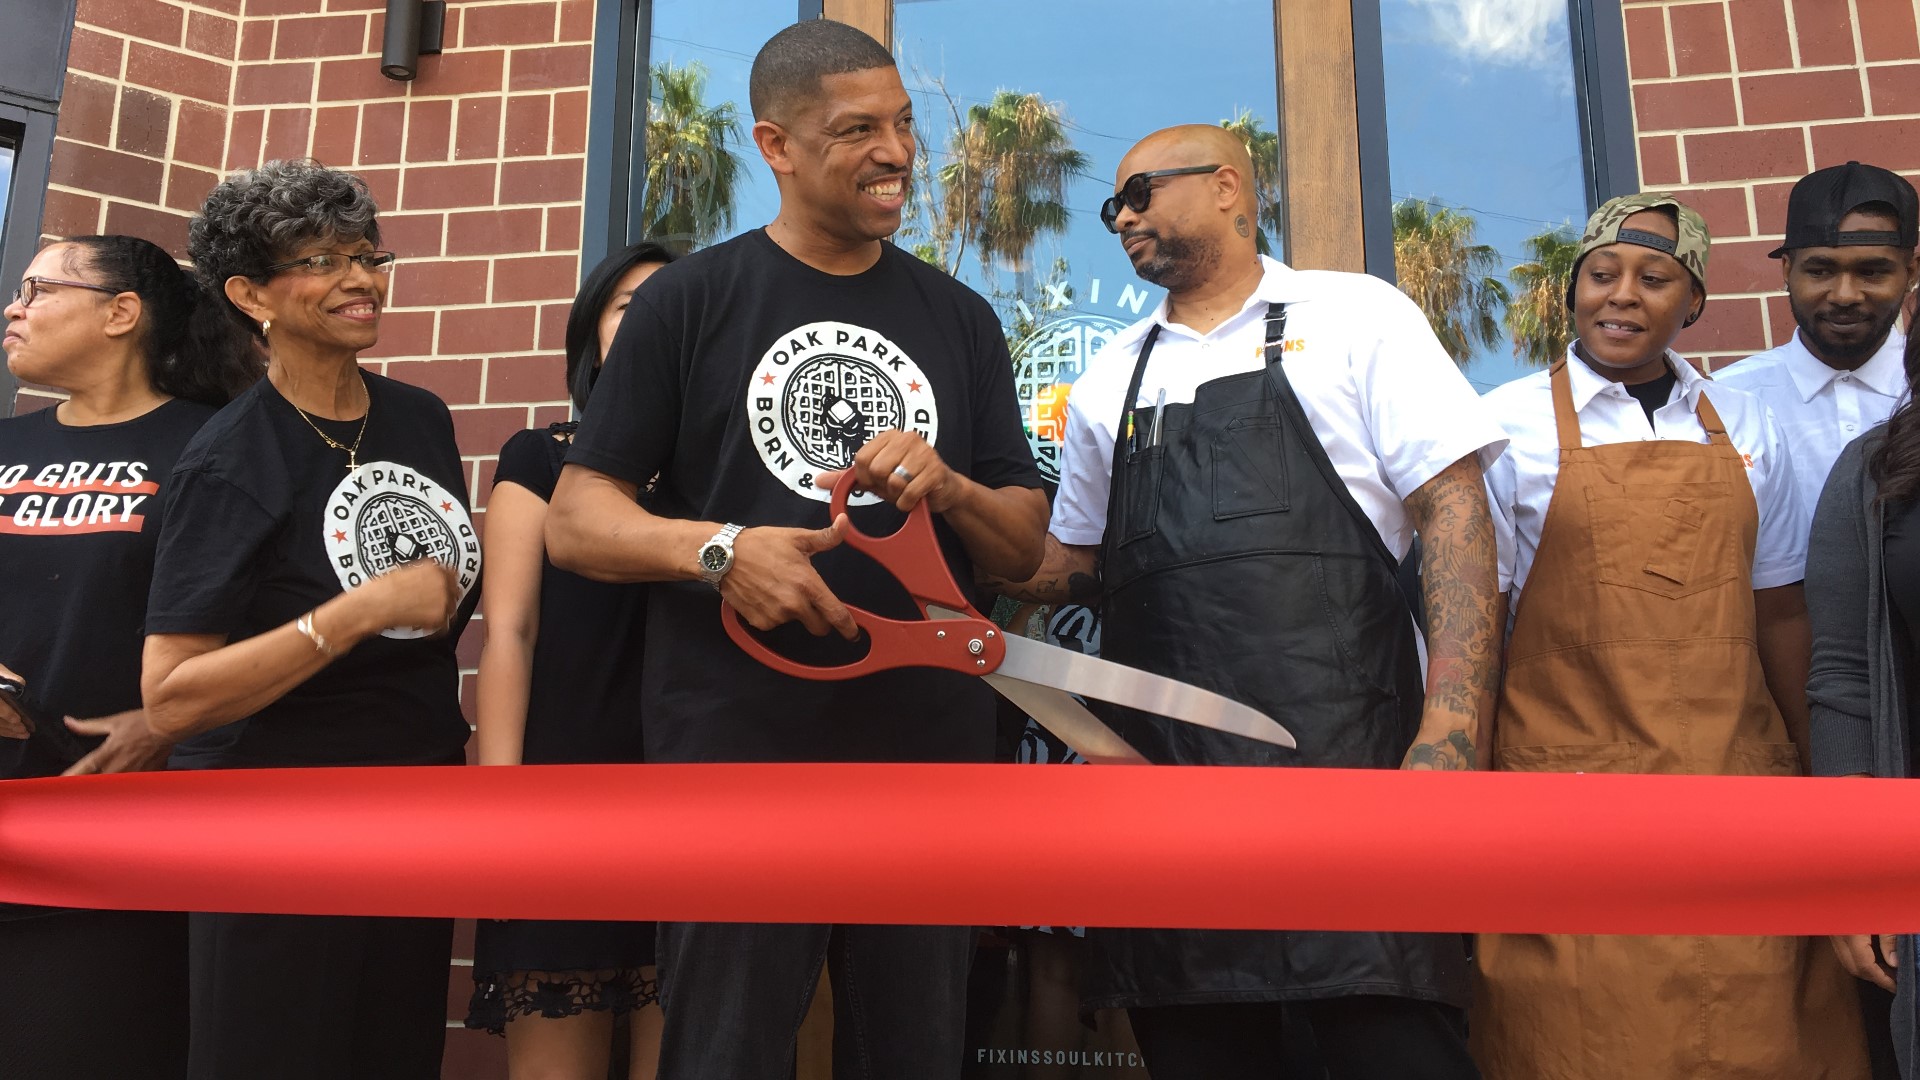 Fixins Soul Kitchen is the new kid on the block. This soul food restaurant celebrated its grand opening on Wednesday morning.